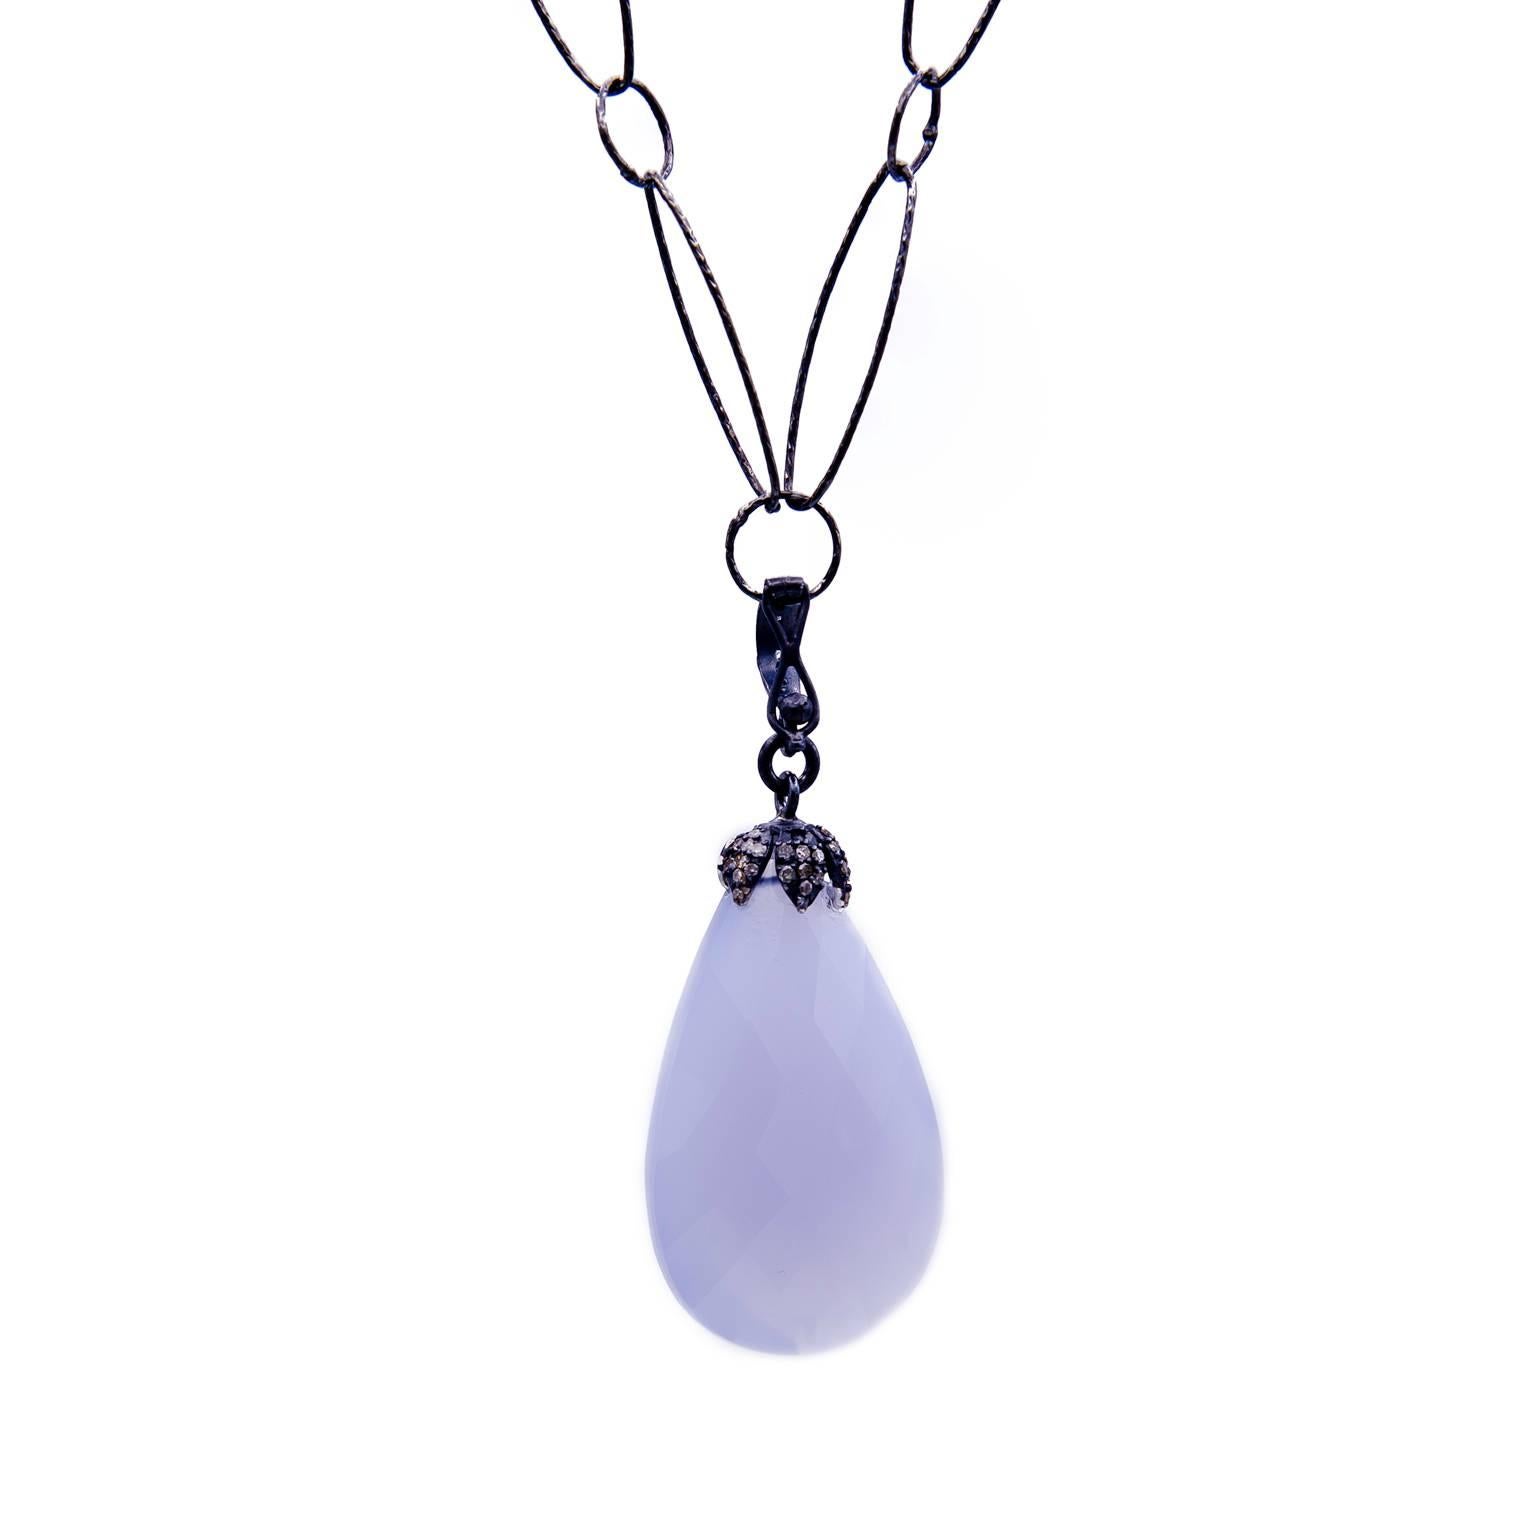 This beautiful chalcadony drop is suspended by a diamond encrusted cap and detachable bale. The light blue milky color of the stone is complimented by the oxidized accents and chain. A perfect neutral to wear often day and night!